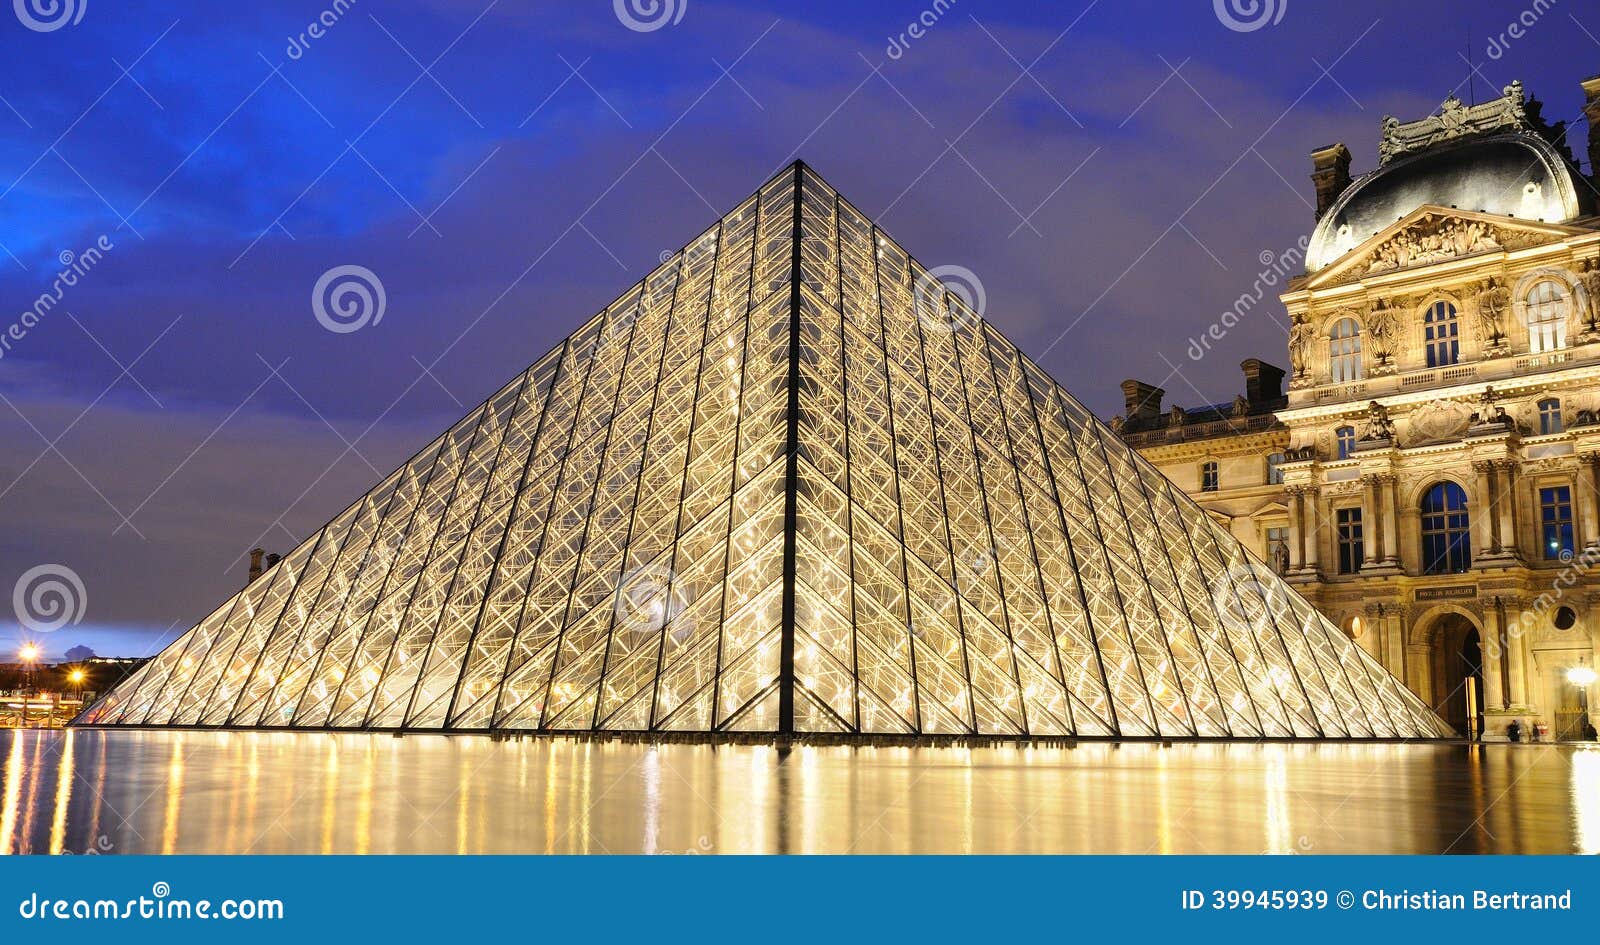 History of the Musee du Louvre museum in Paris France